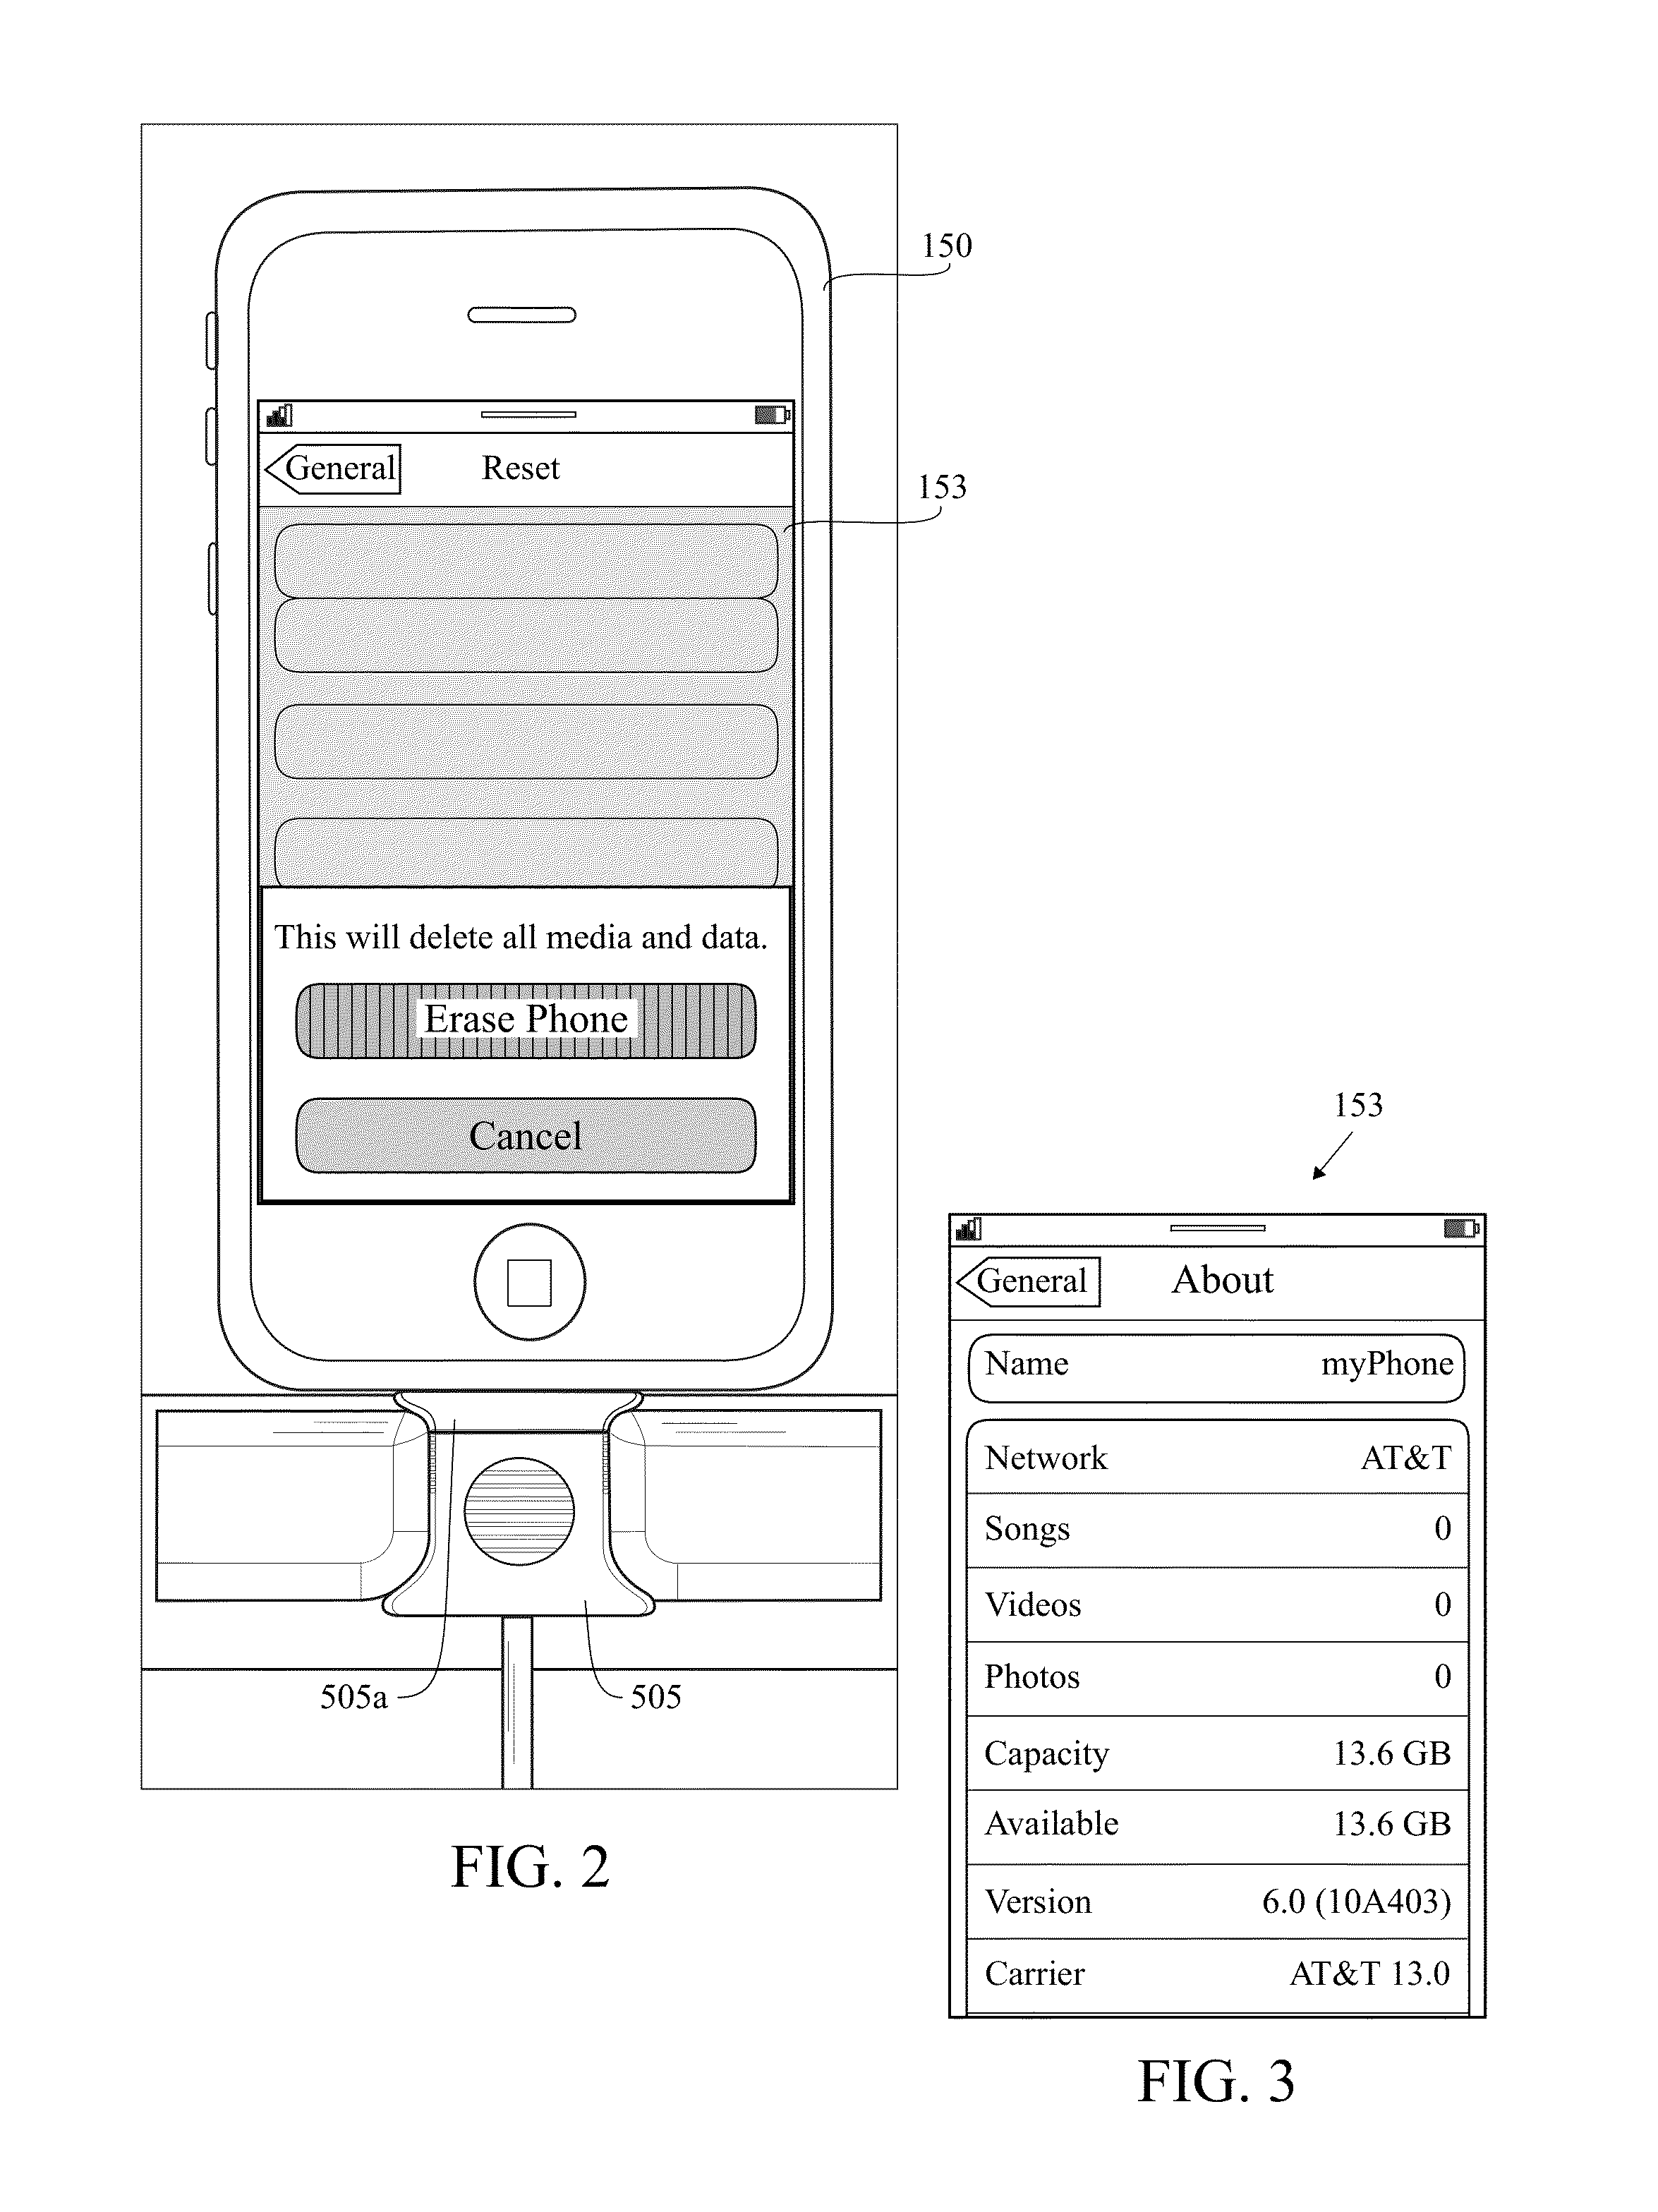 Method And Apparatus For Removing Data From A Recycled Electronic Device